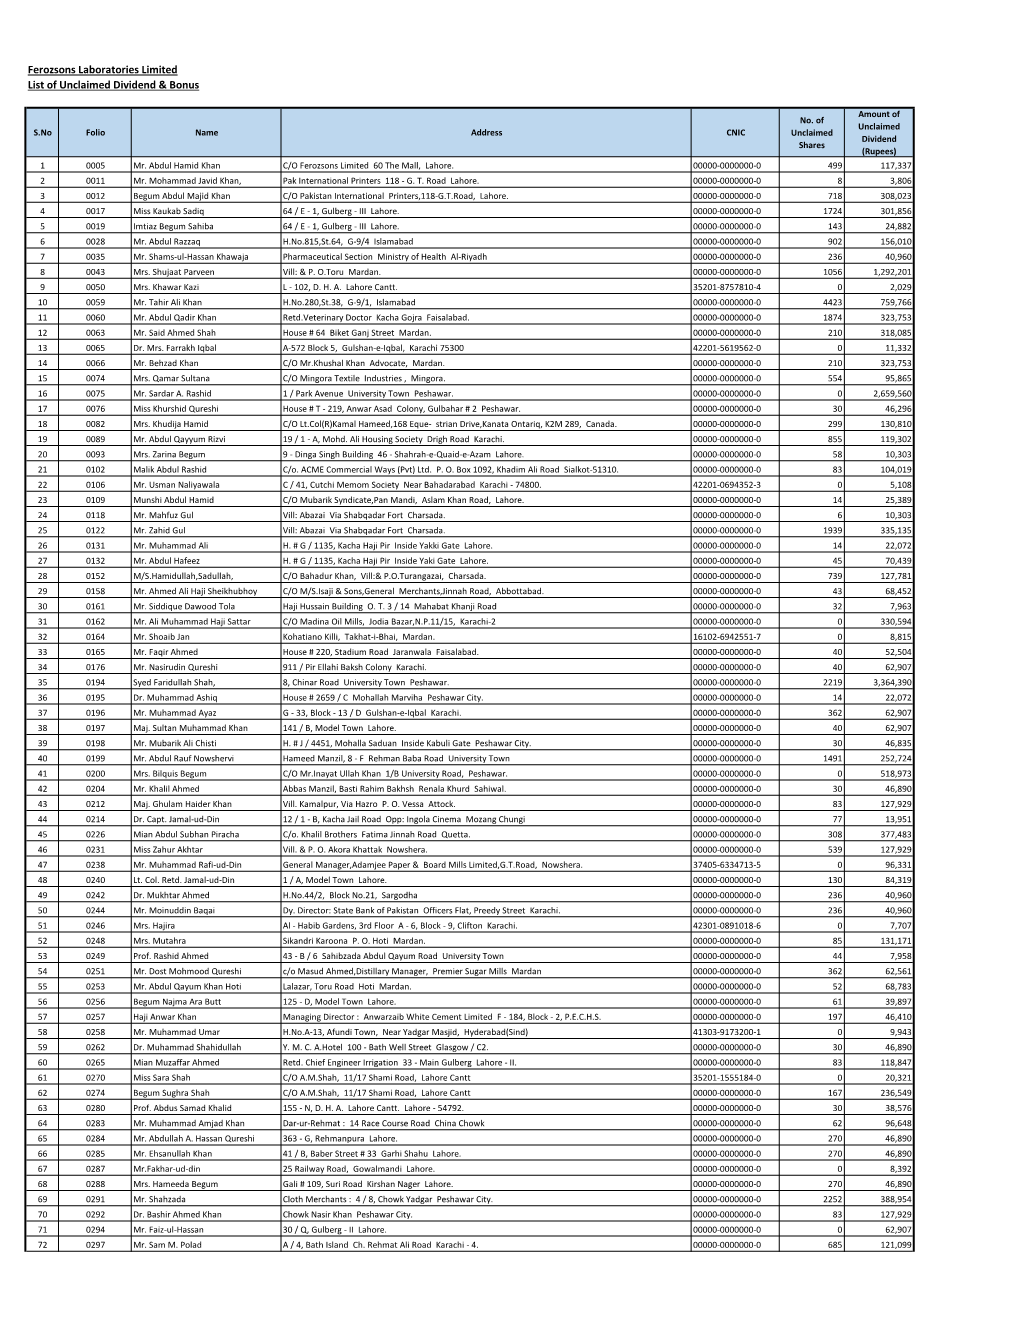 List of Unclaimed Dividends and Shares